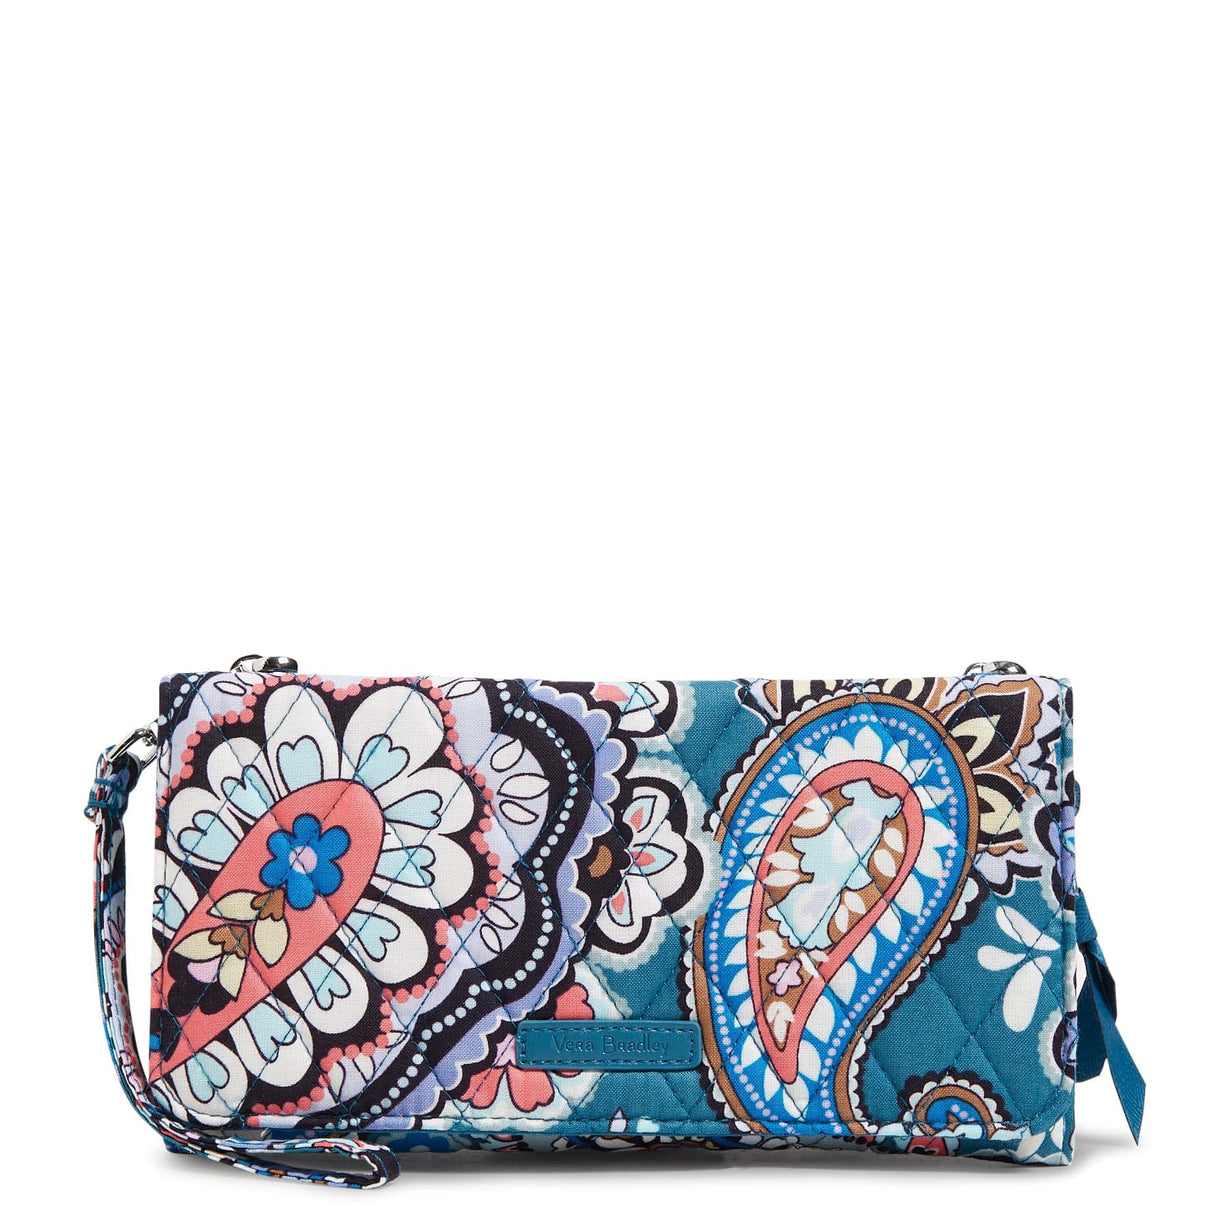 Vera Bradley's RFID-blocking Wallet Is the Perfect $20 Gift for